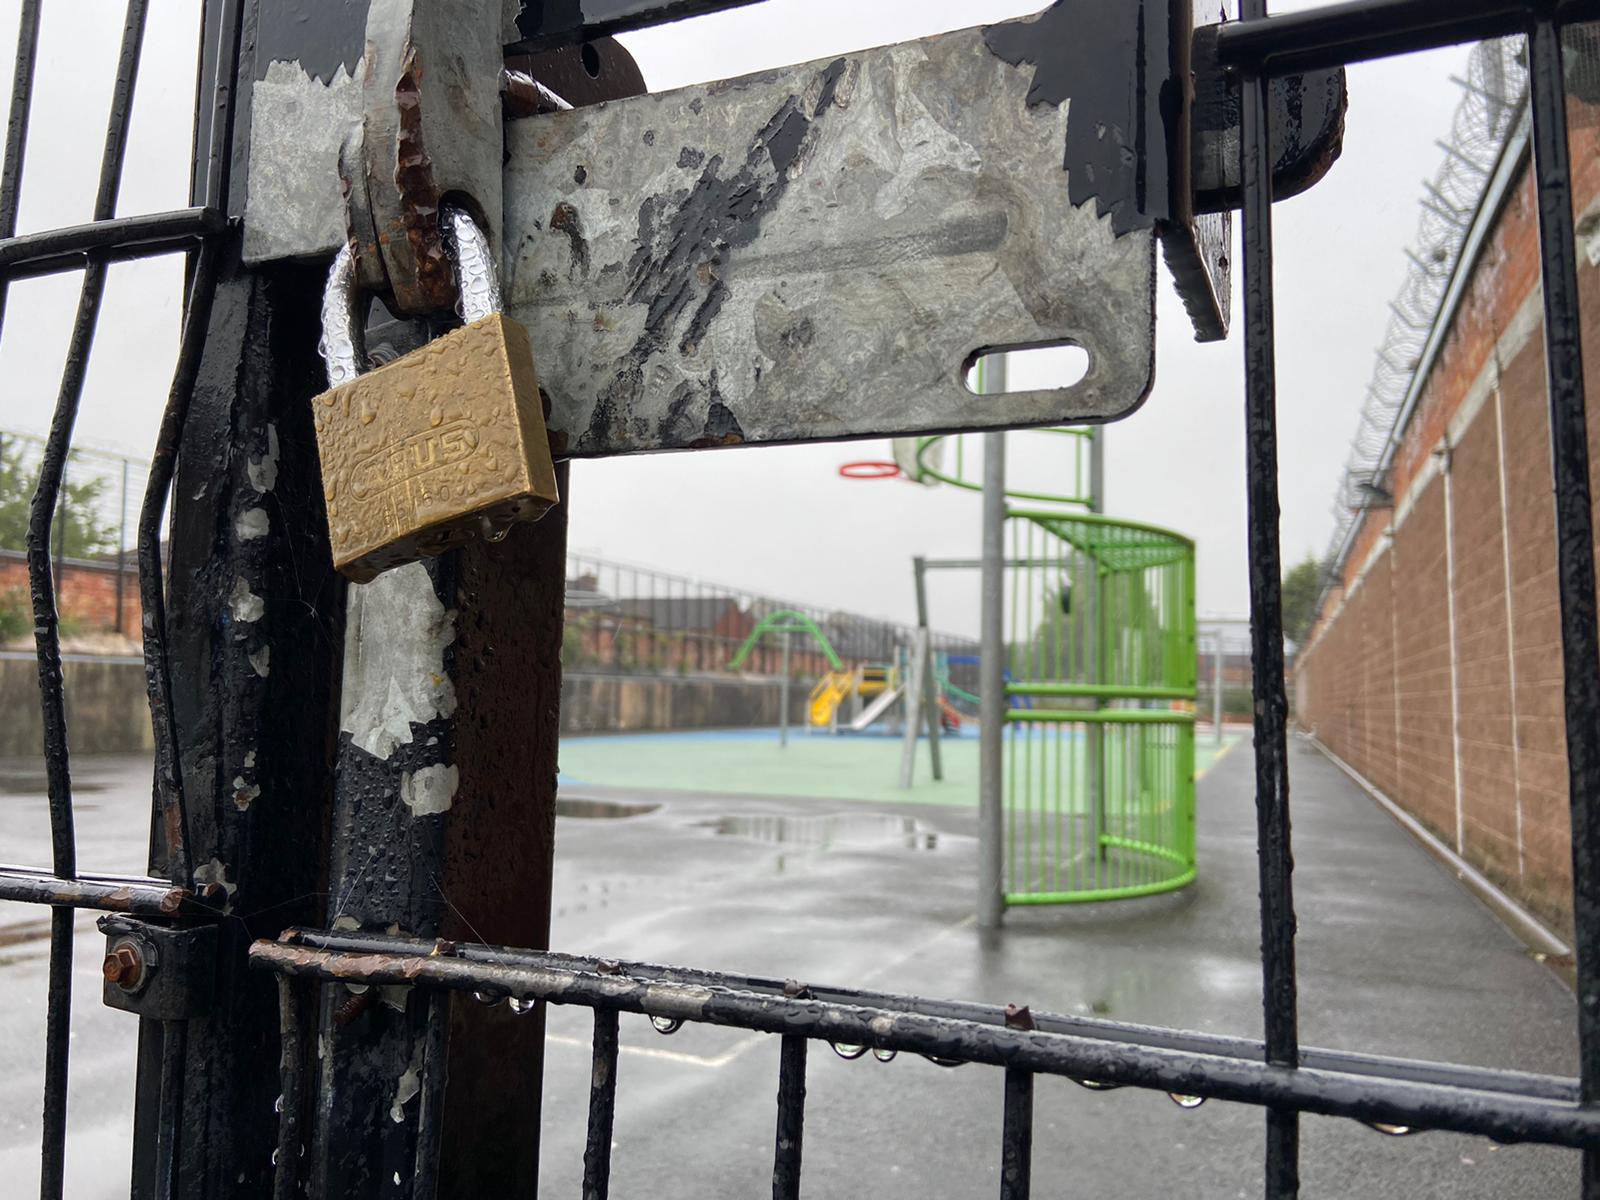 LOCKED UP: The play park in Springfield Avenue 